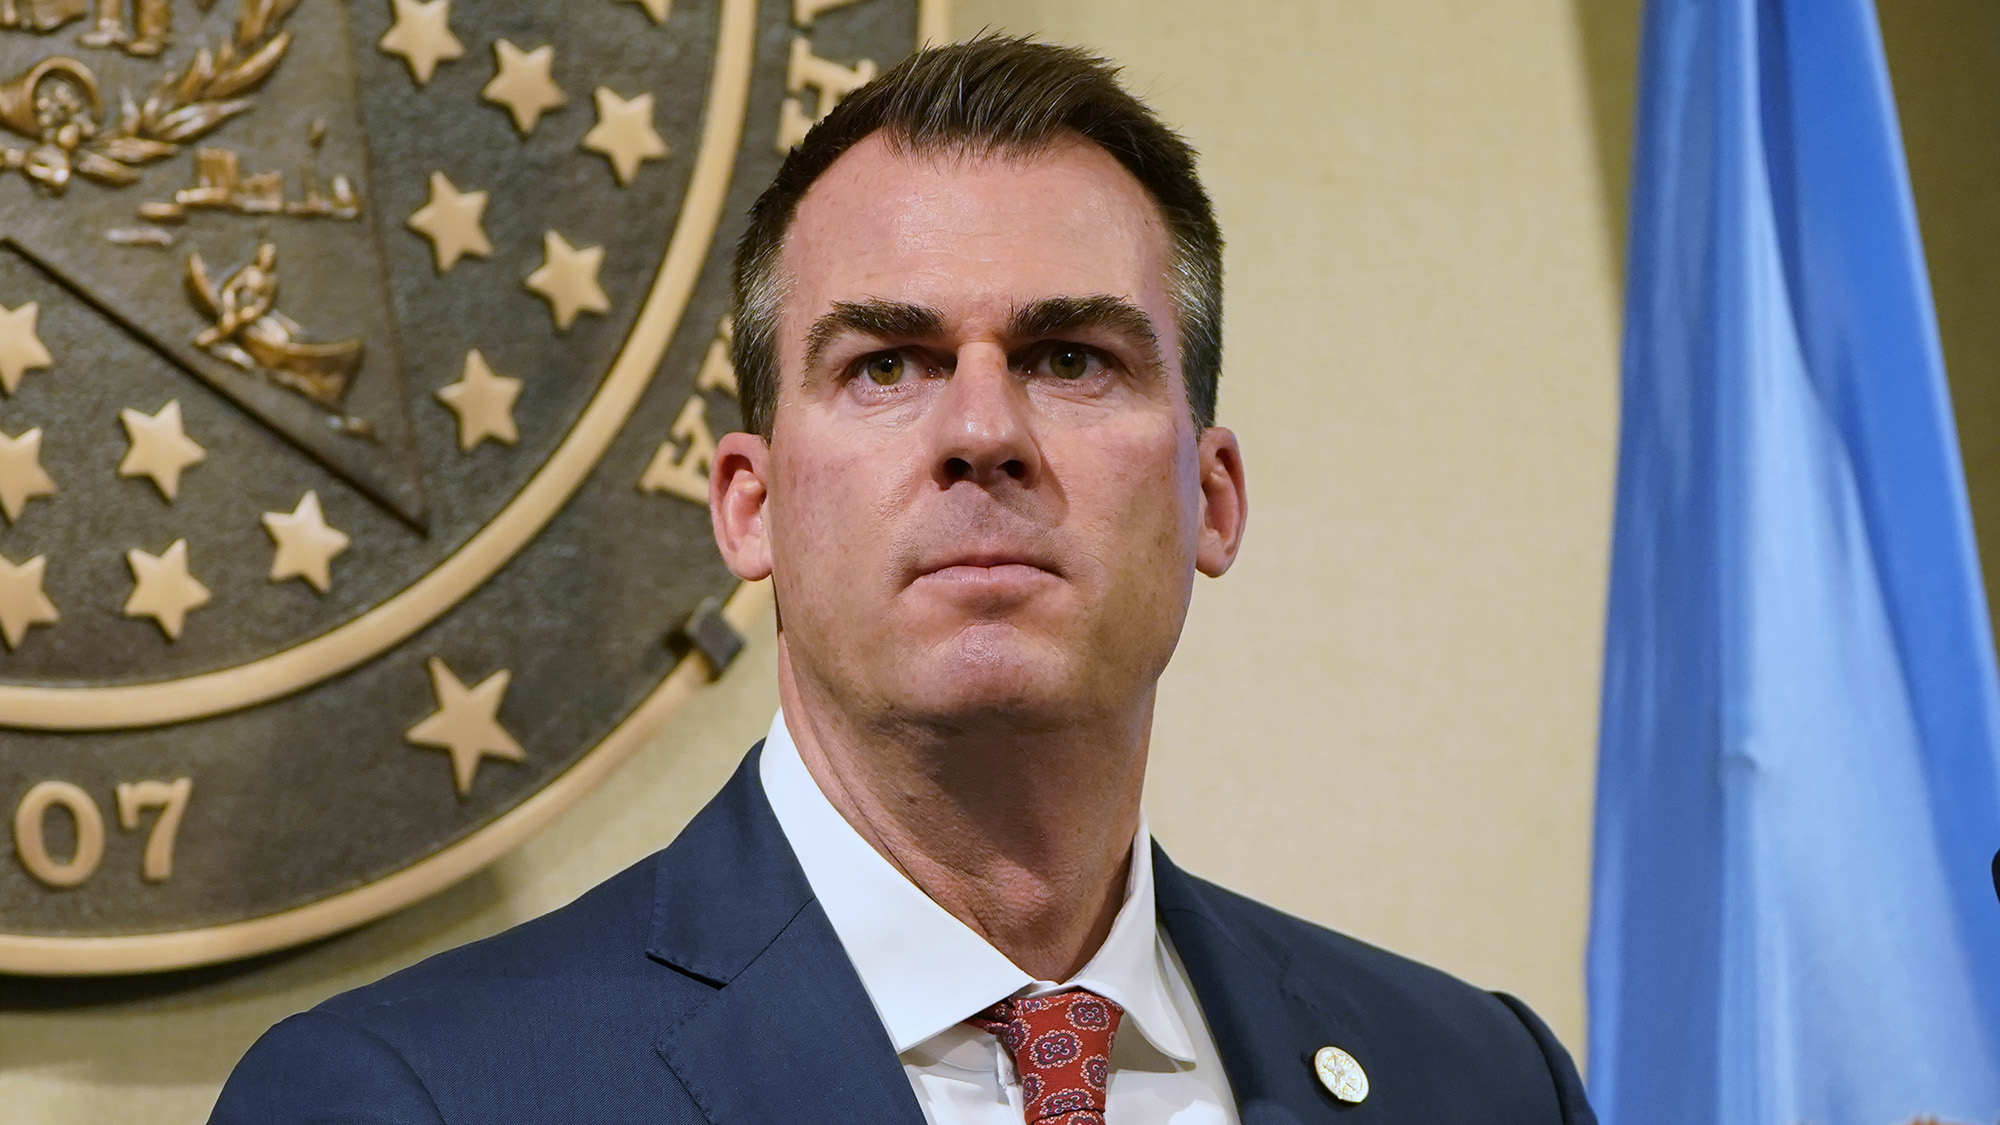 Oklahoma Gov. Kevin Stitt is seen in this Feb. 11, 2021 file image. 